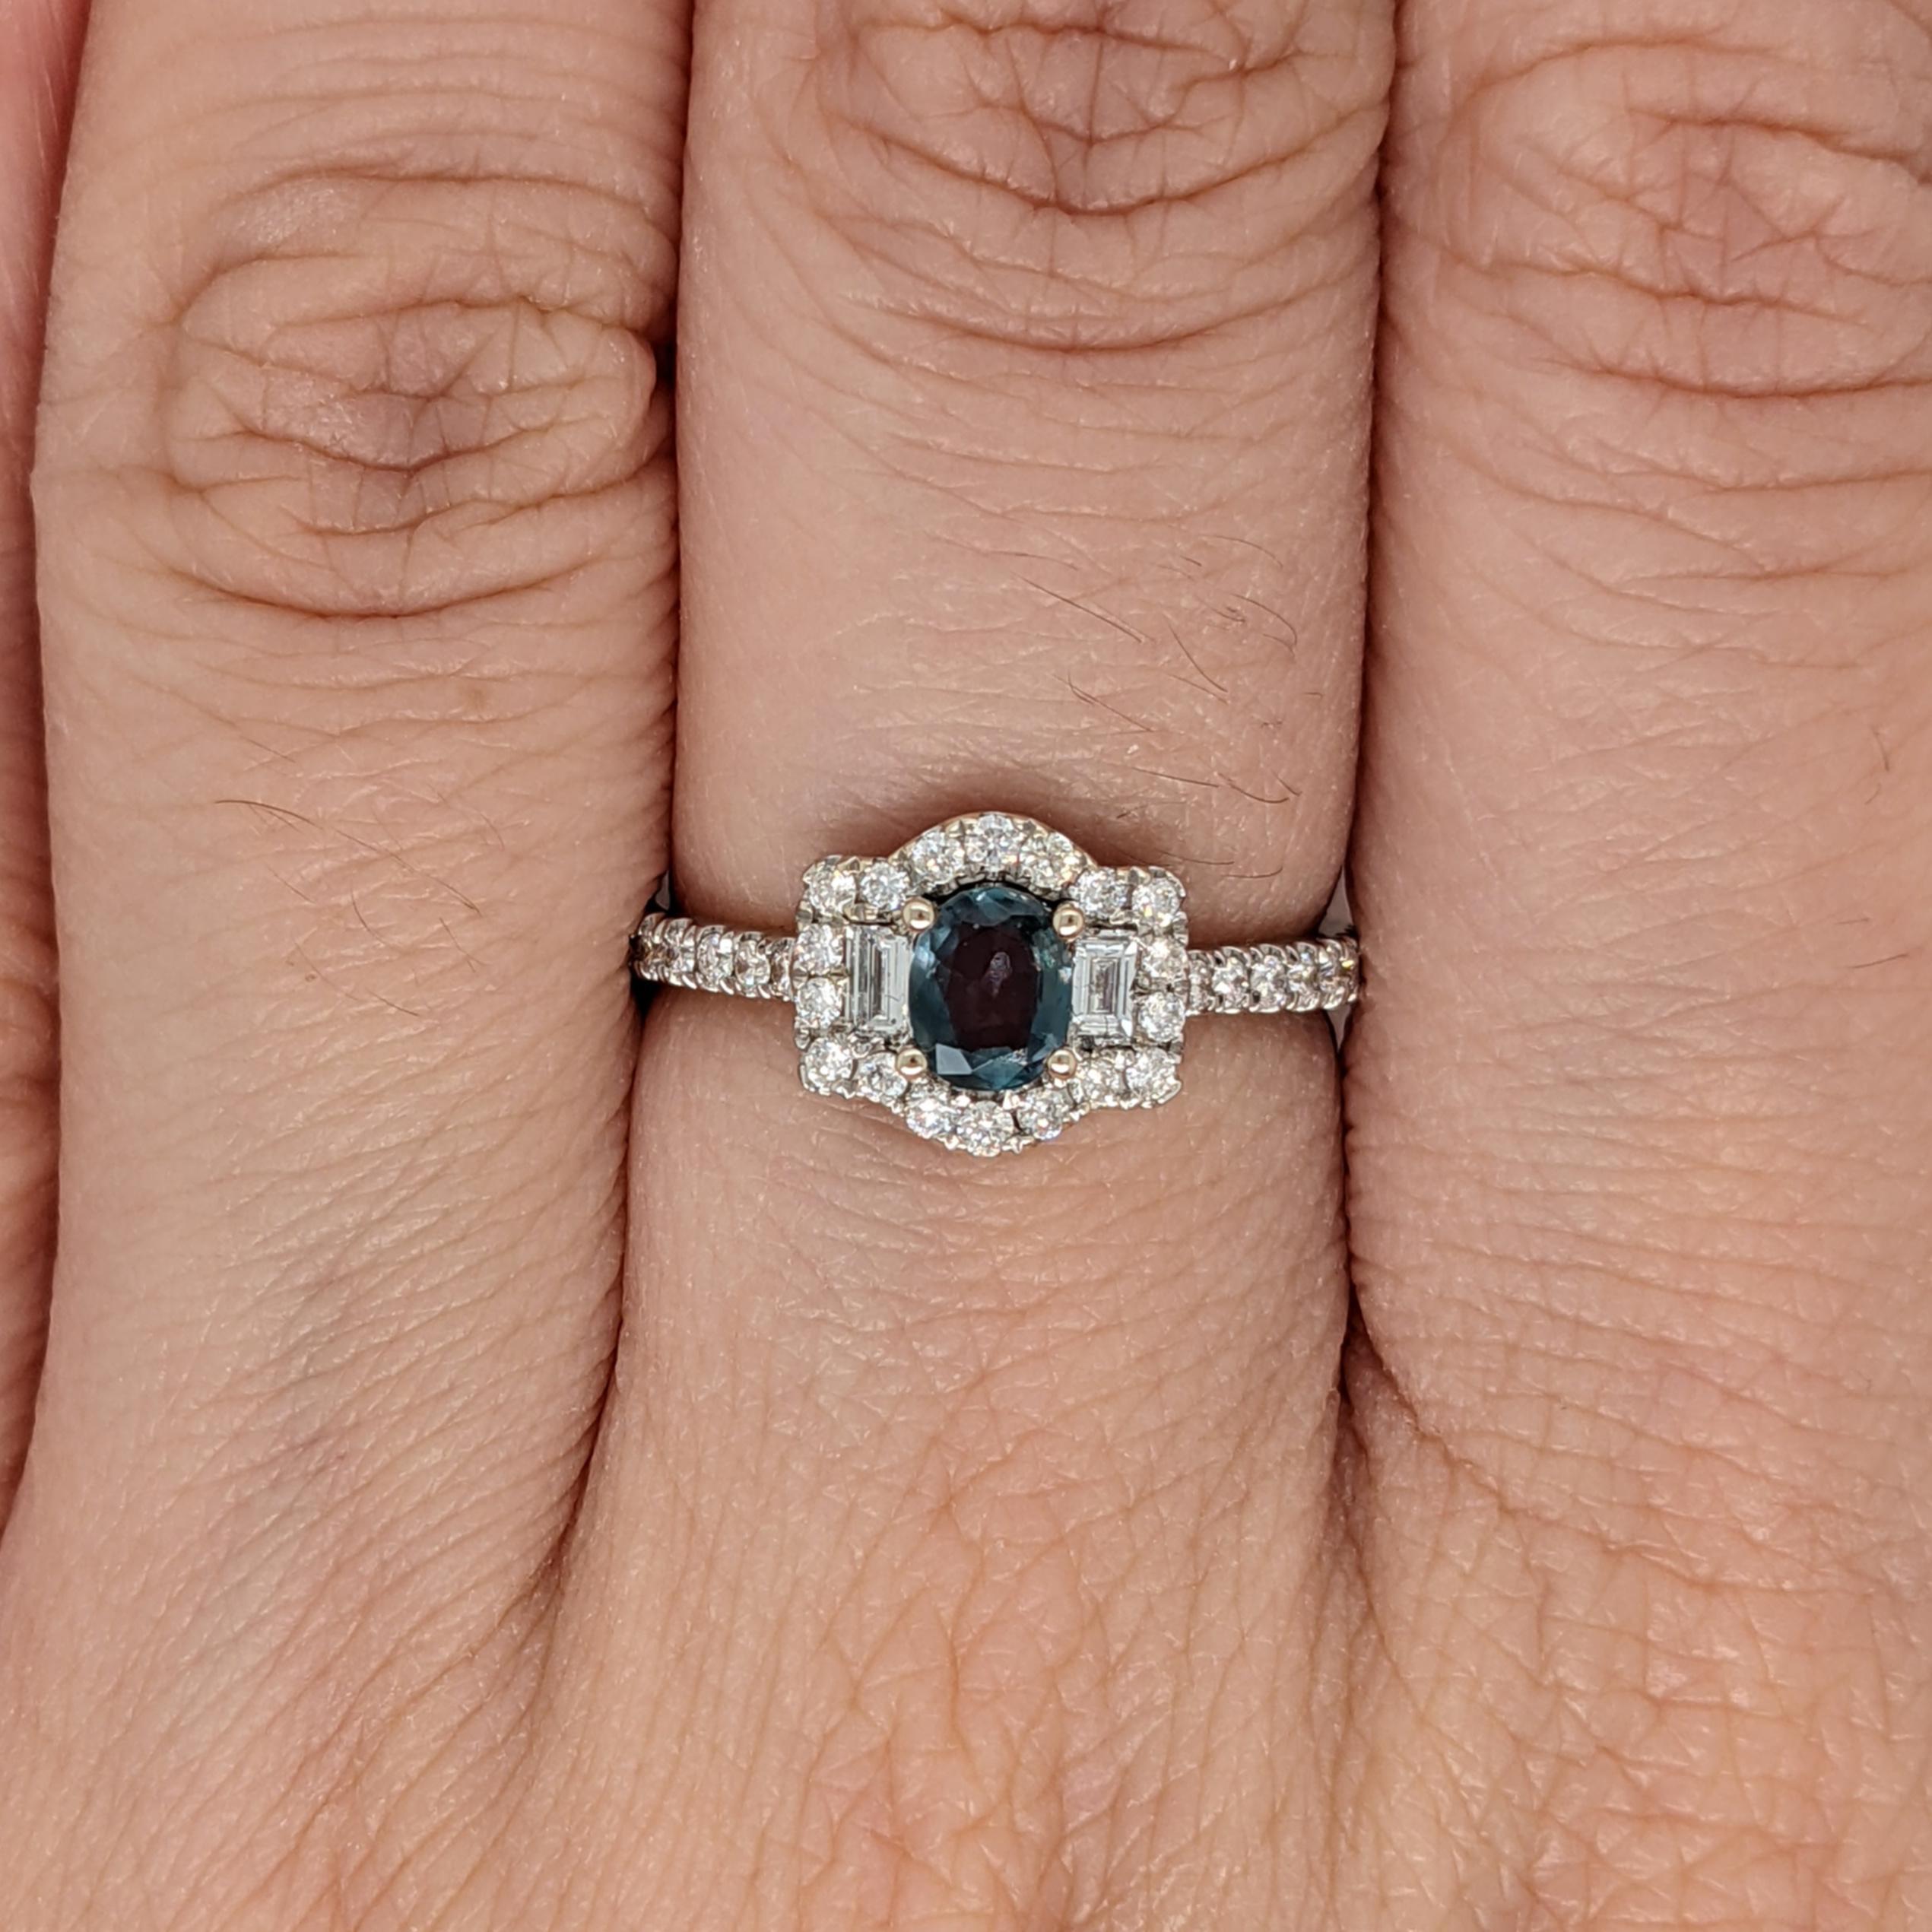 This unique ring features a natural color changing Alexandrite with natural earth-mined baguette and round diamond accents giving this ring a one-of-a-kind design. The color changing natural alexandrite appears blue green in daylight and shifts to a